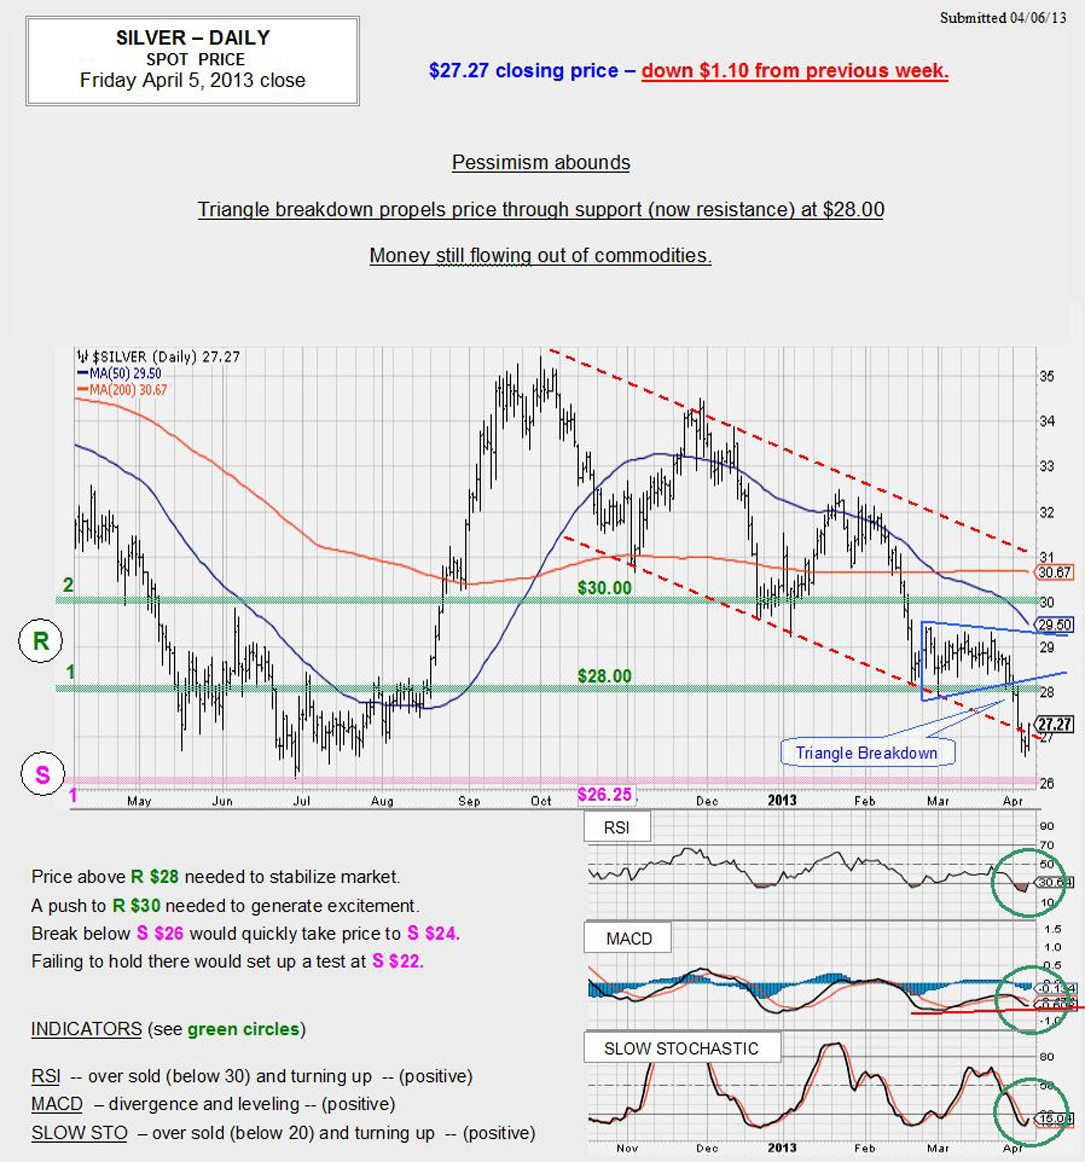 APRIL 05, 2013 chart & commentary